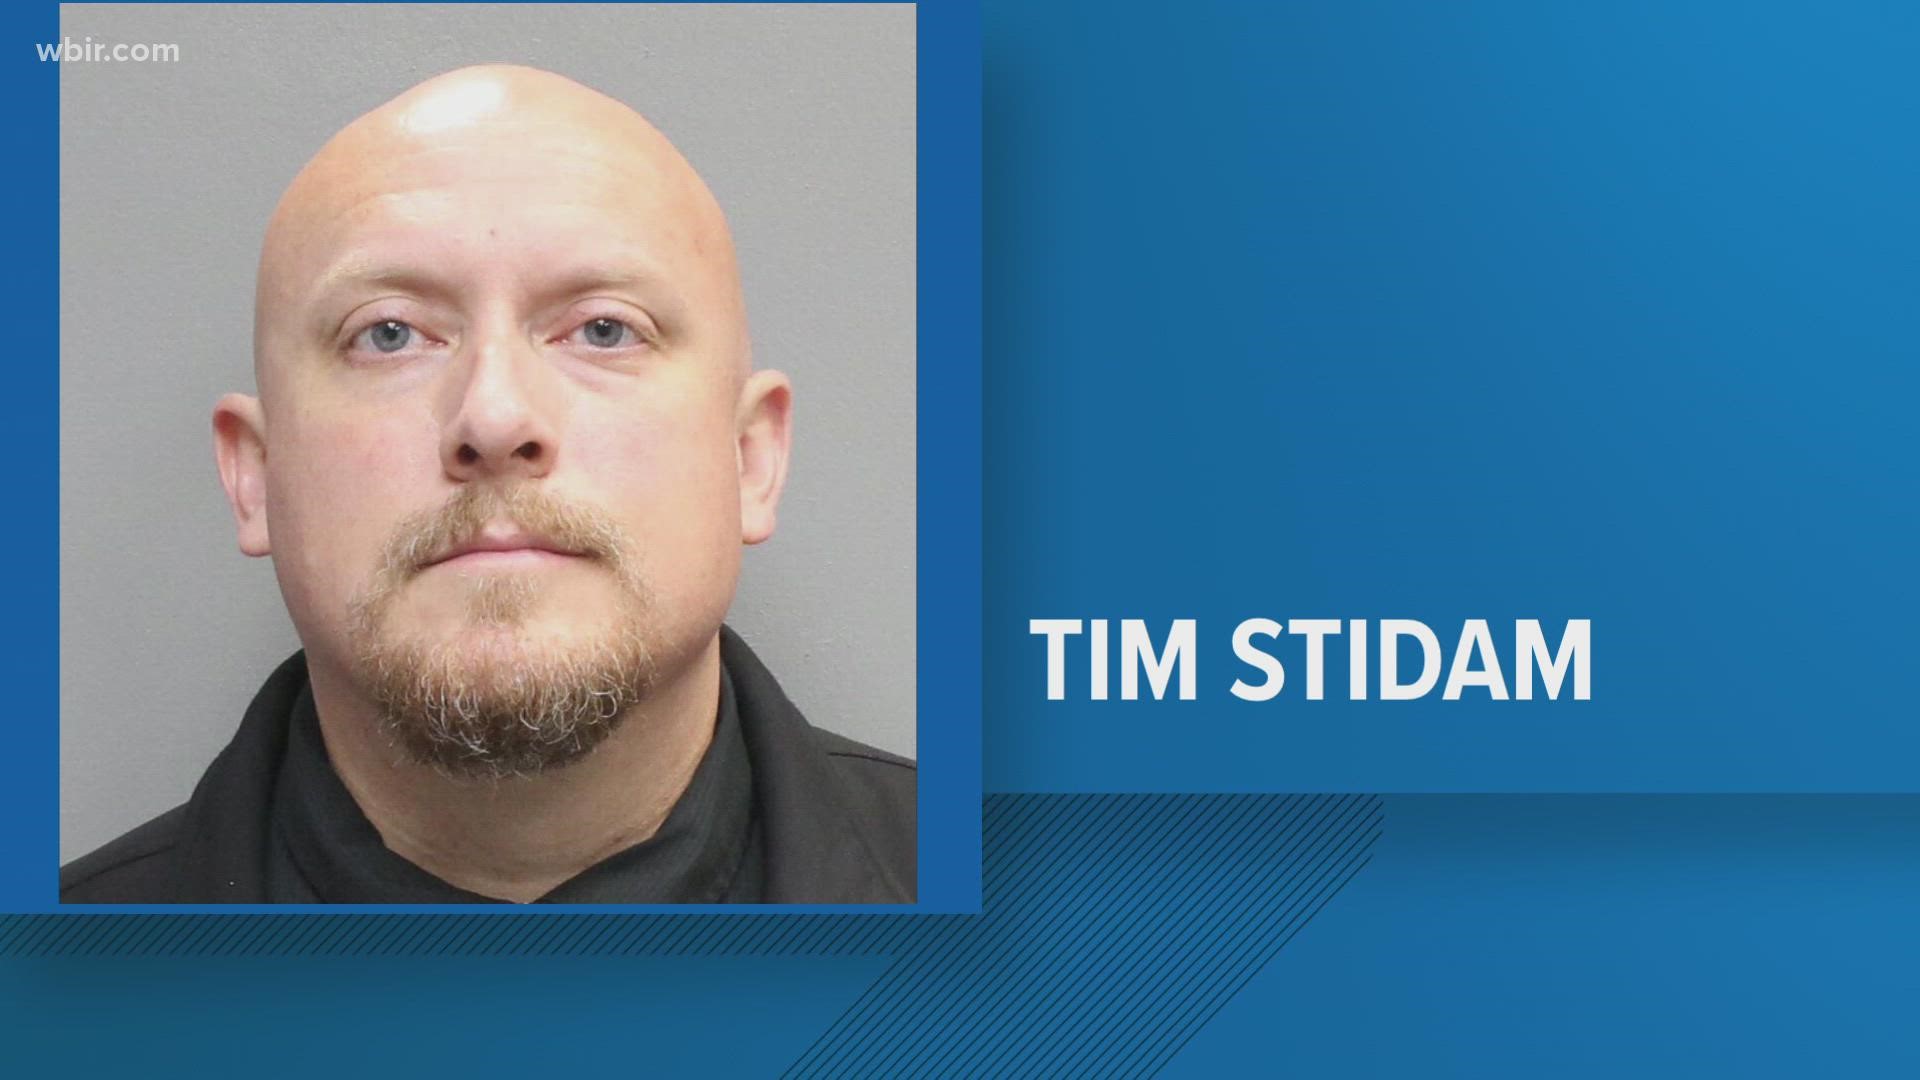 Tim Stidam's charges are related to a February call he made while on duty involving a minor teen girl and images on her cellphone, WBIR has learned.